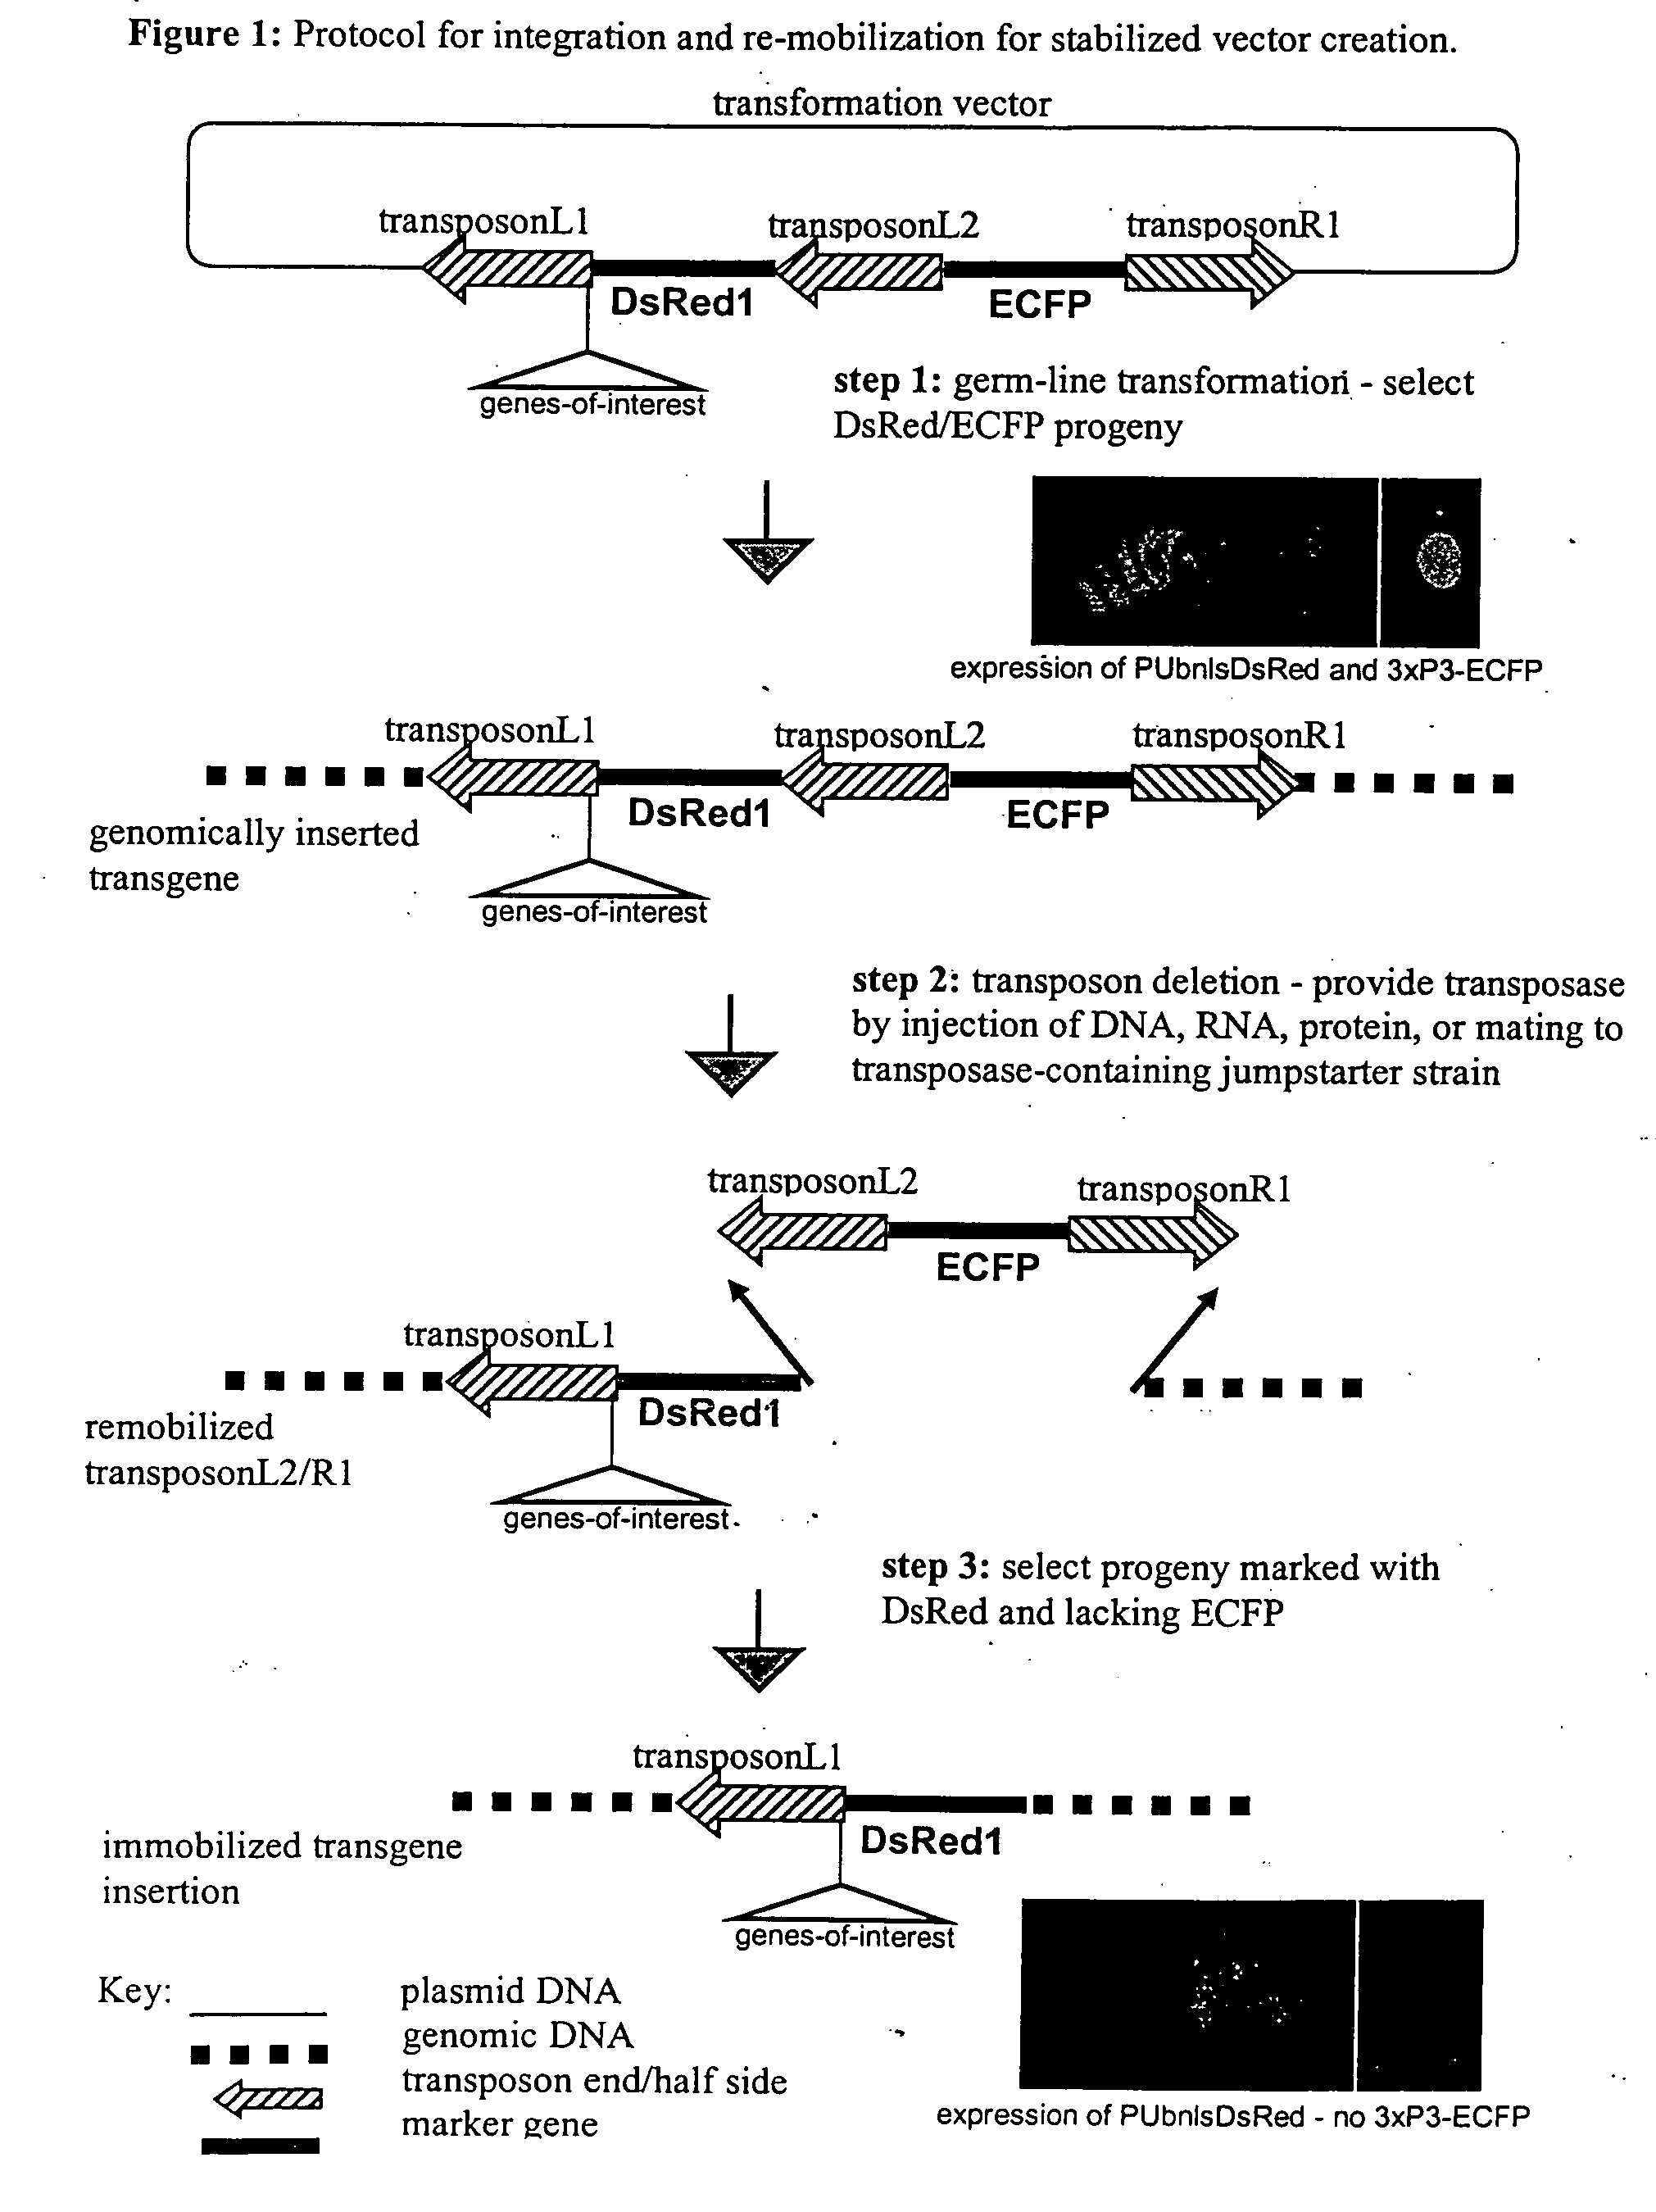 Systems for gene targeting and producing stable genomic transgene insertions